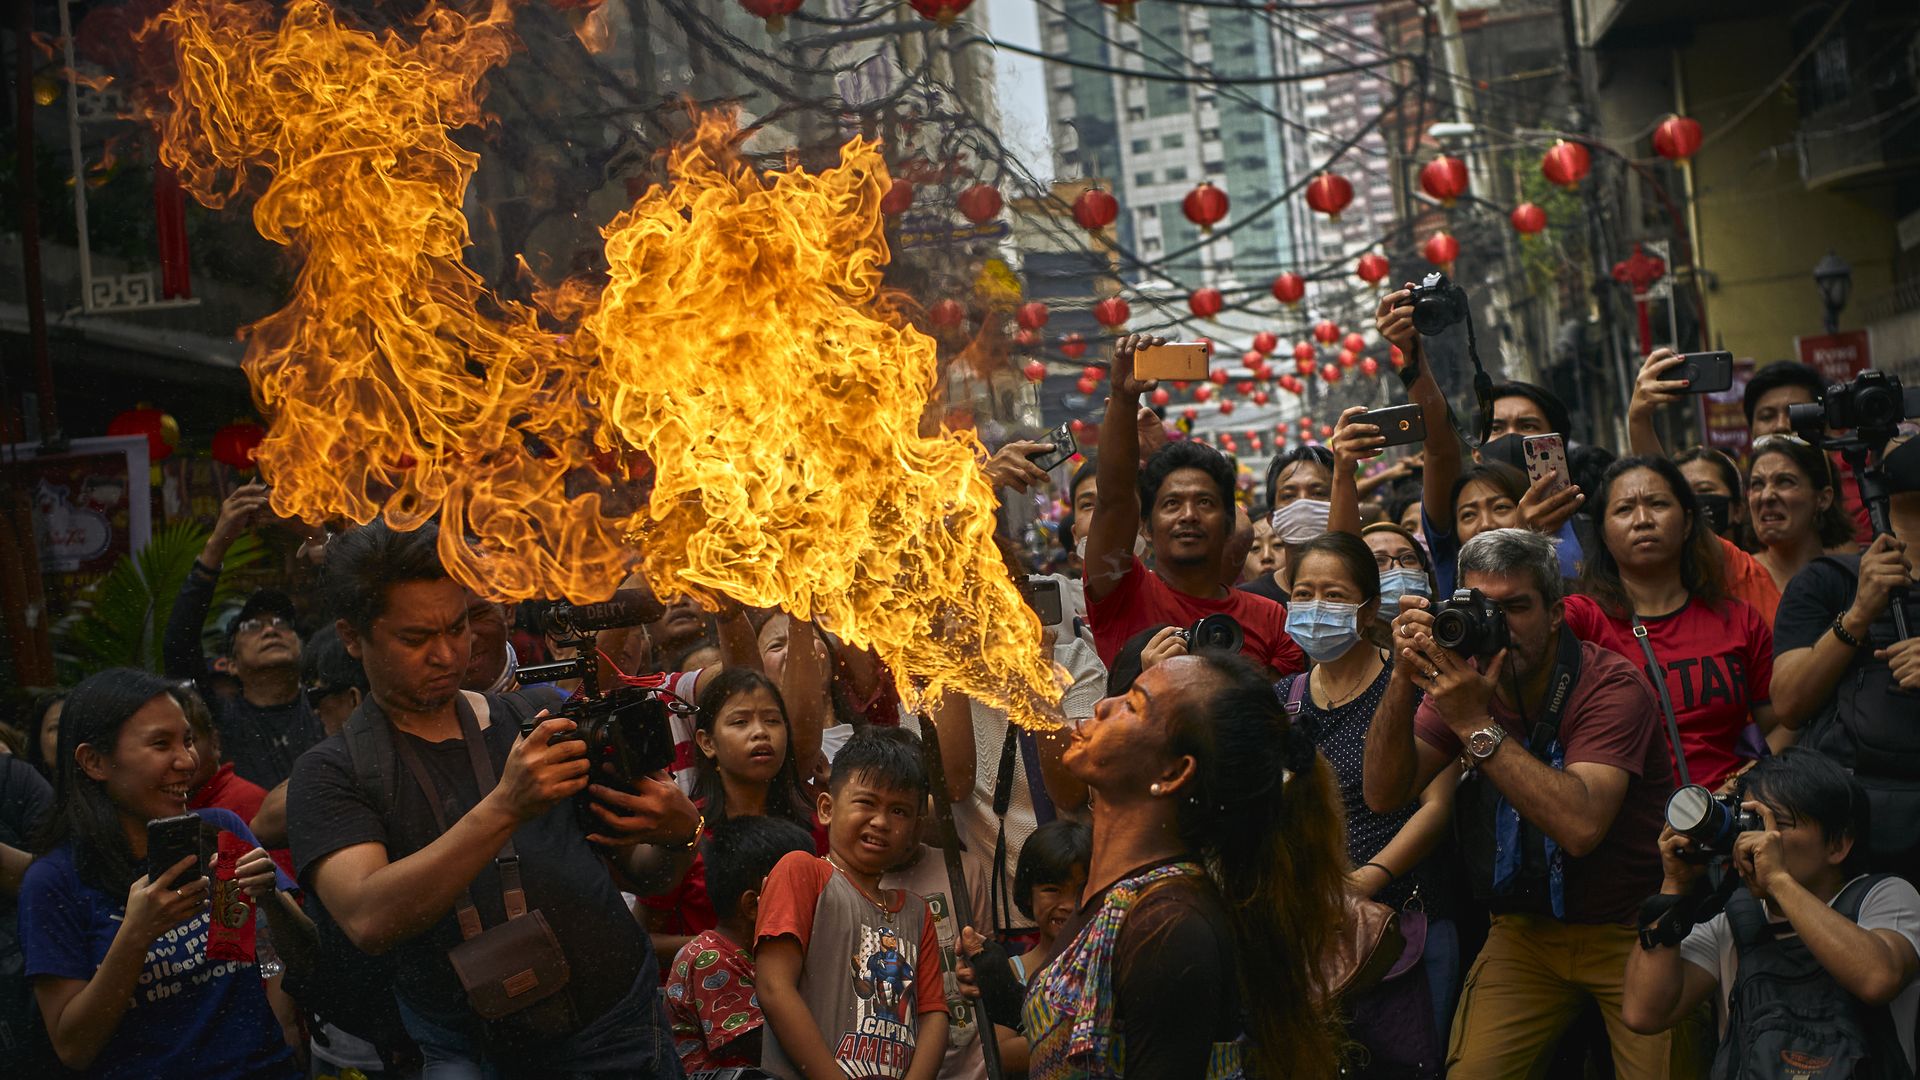 In this image, a man breathes fire as a dragon dancer celebrating the Lunar New Year